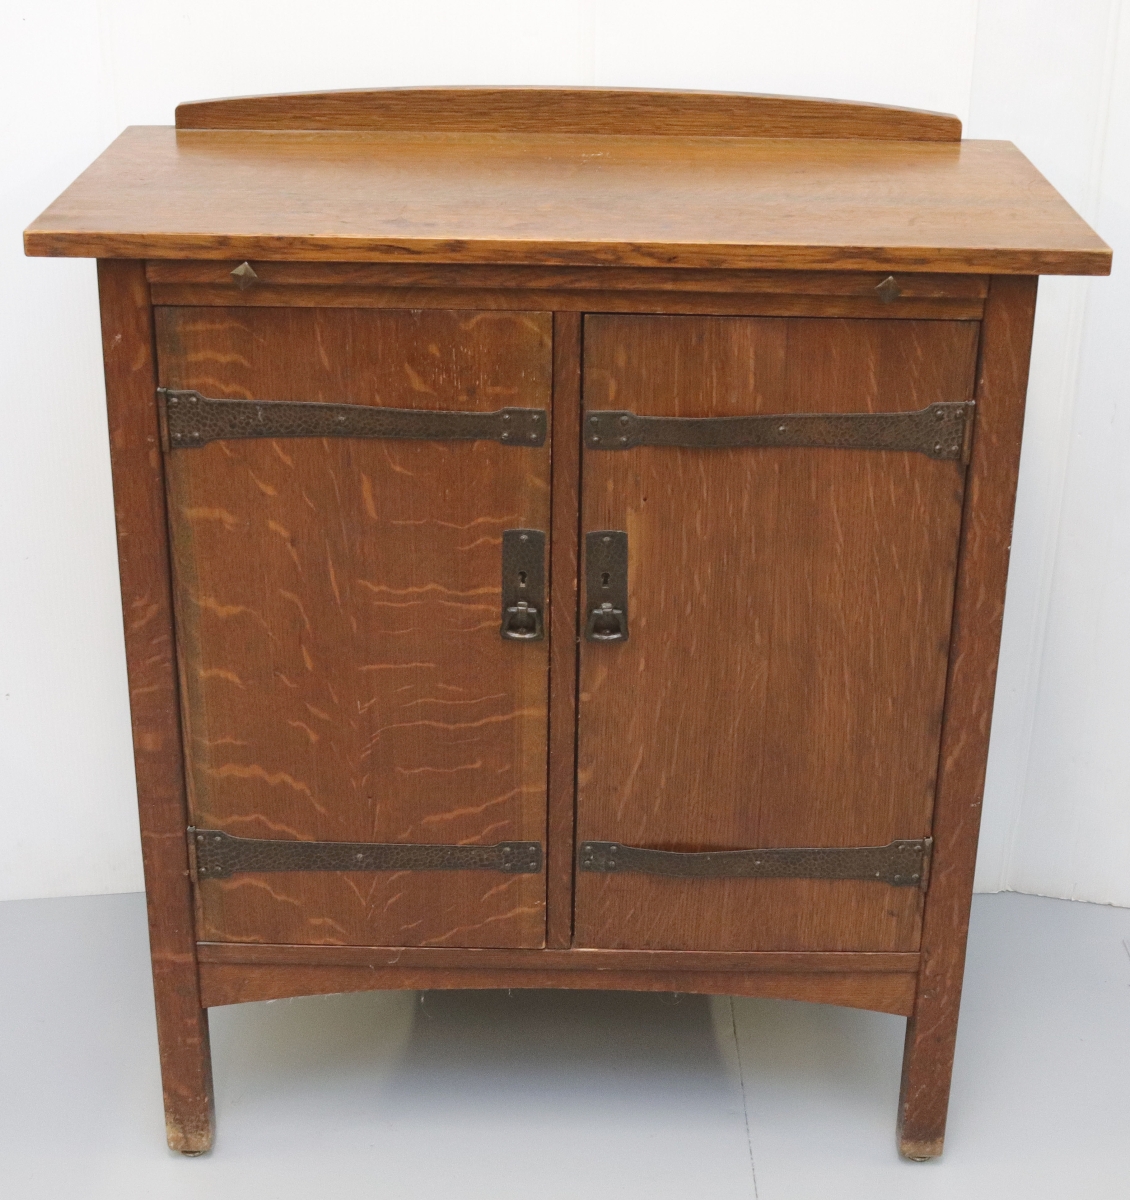 A notable furniture lot in the sale was this L&JG Stickley oak cellarette that earned $5,535.